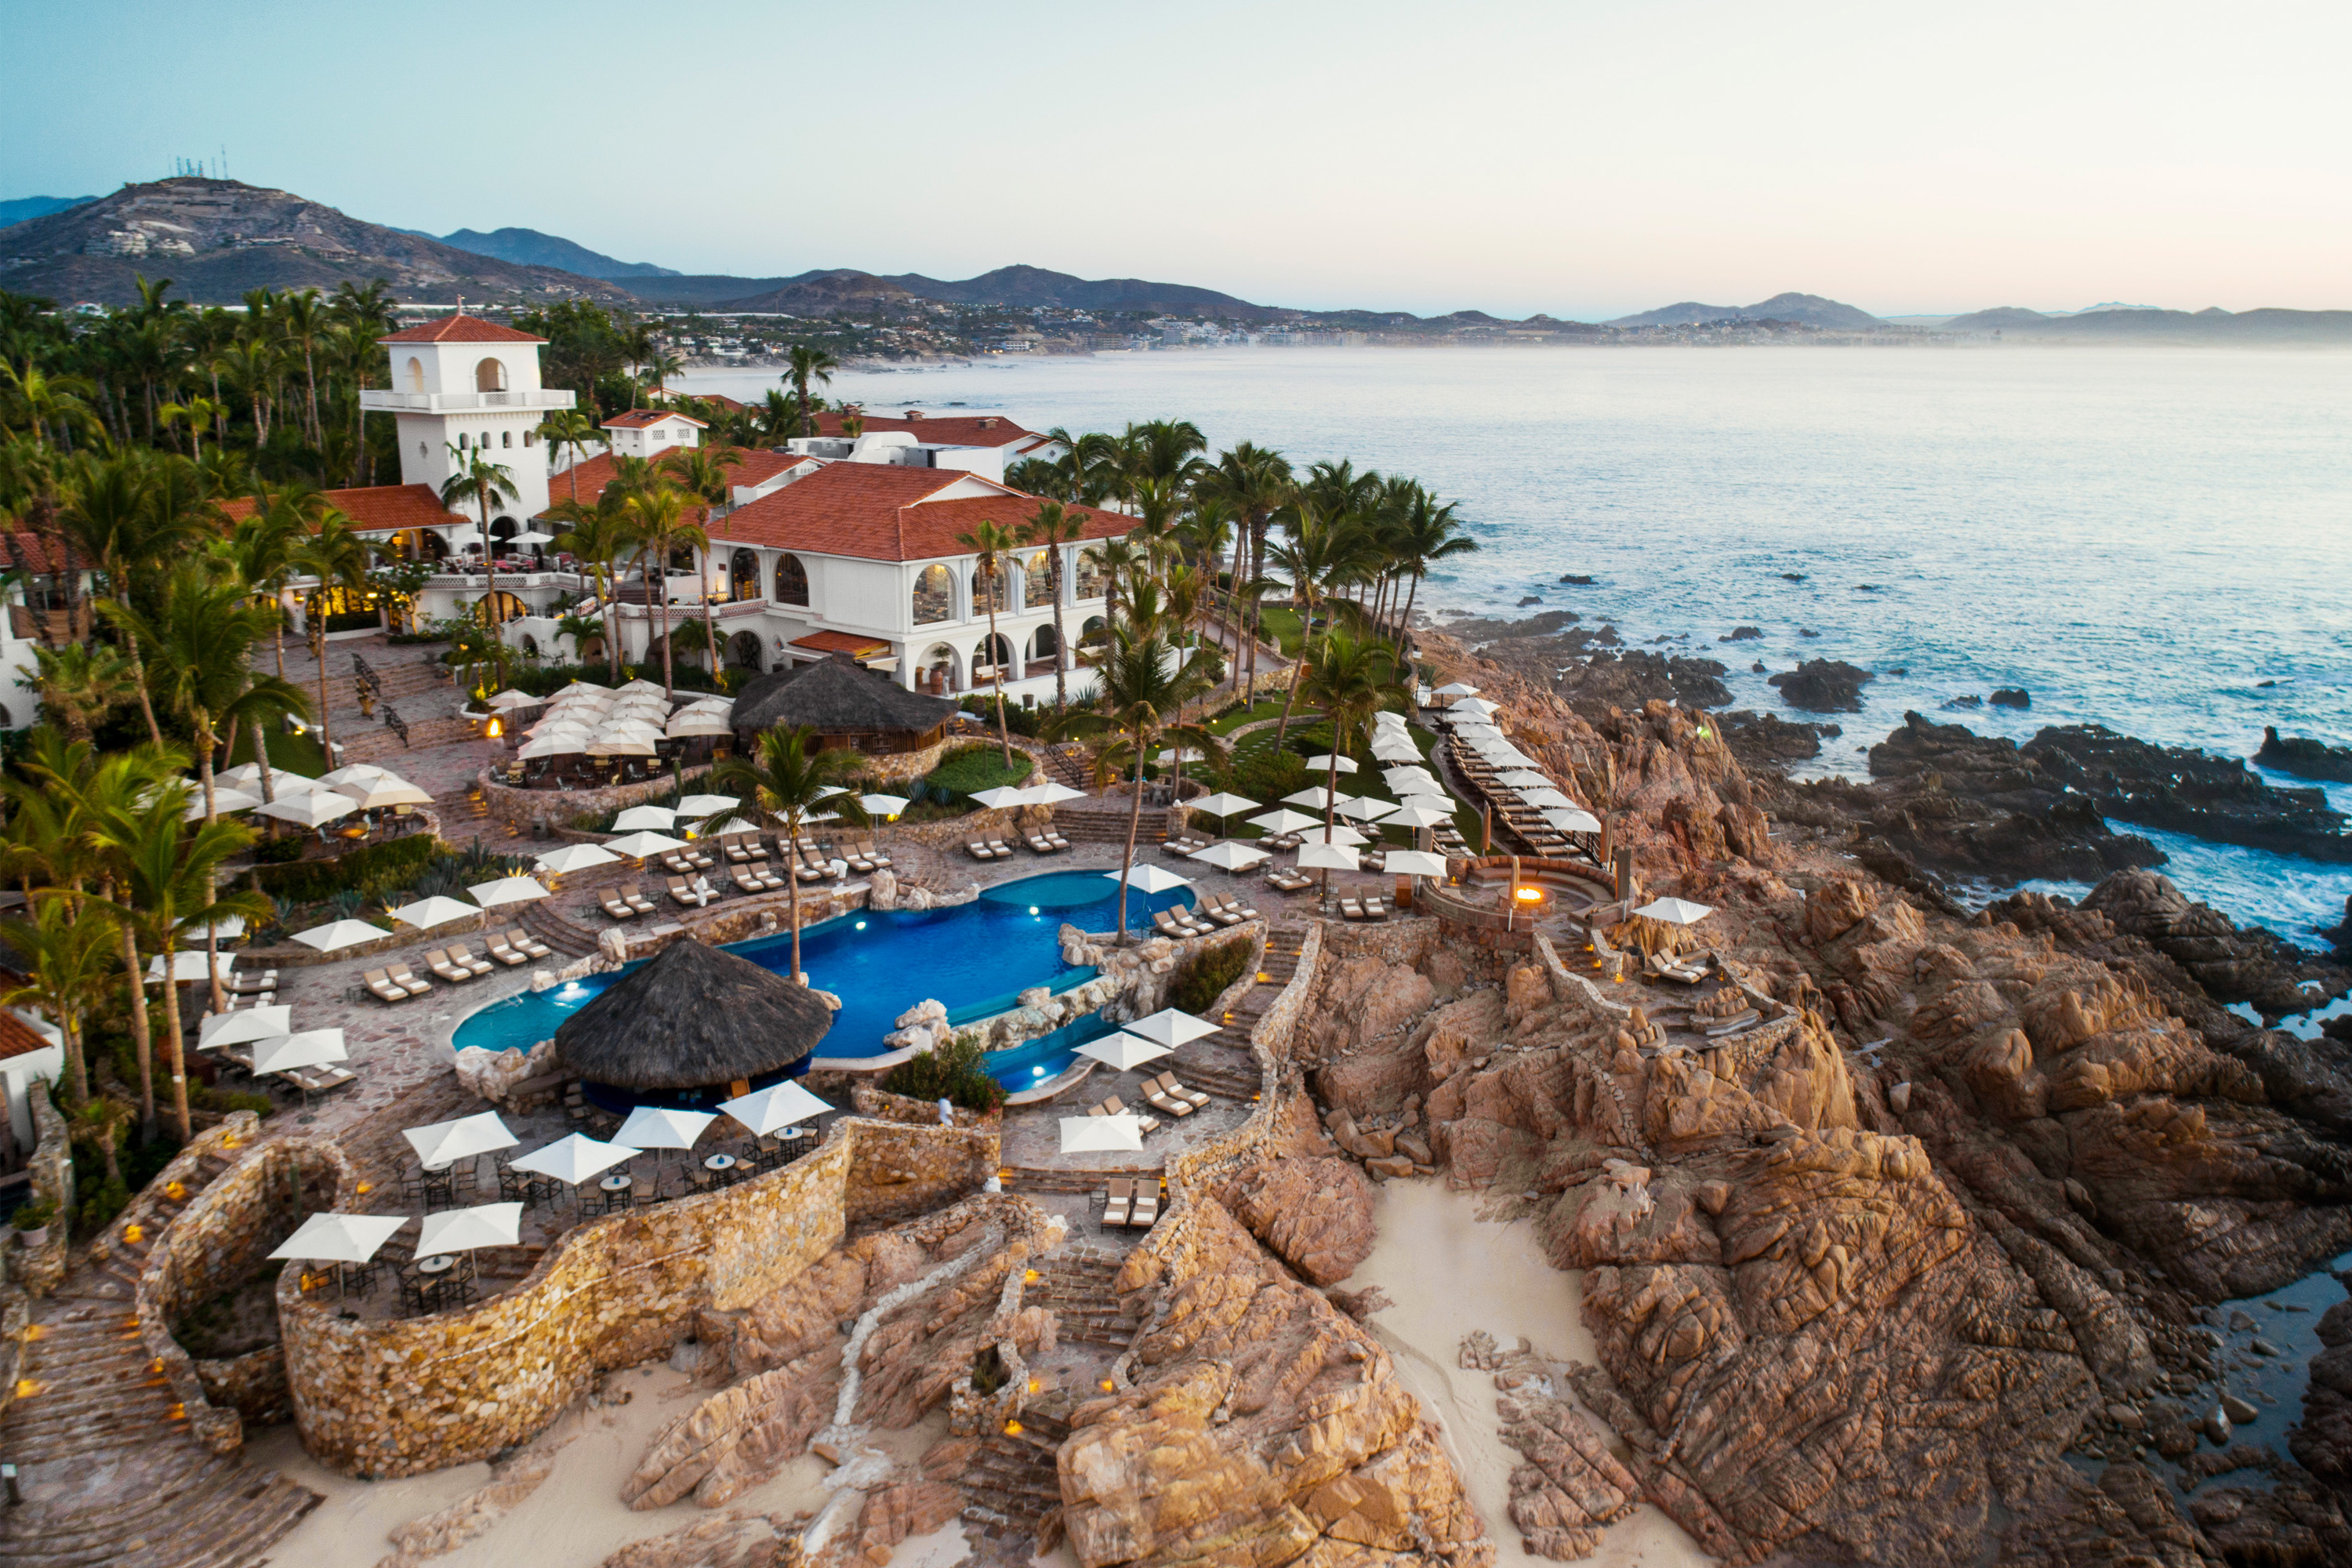 https://www.cabovillas.com/Properties/Resorts/One-Only_Palmilla/FULL/One-Only_Palmilla-1.jpg